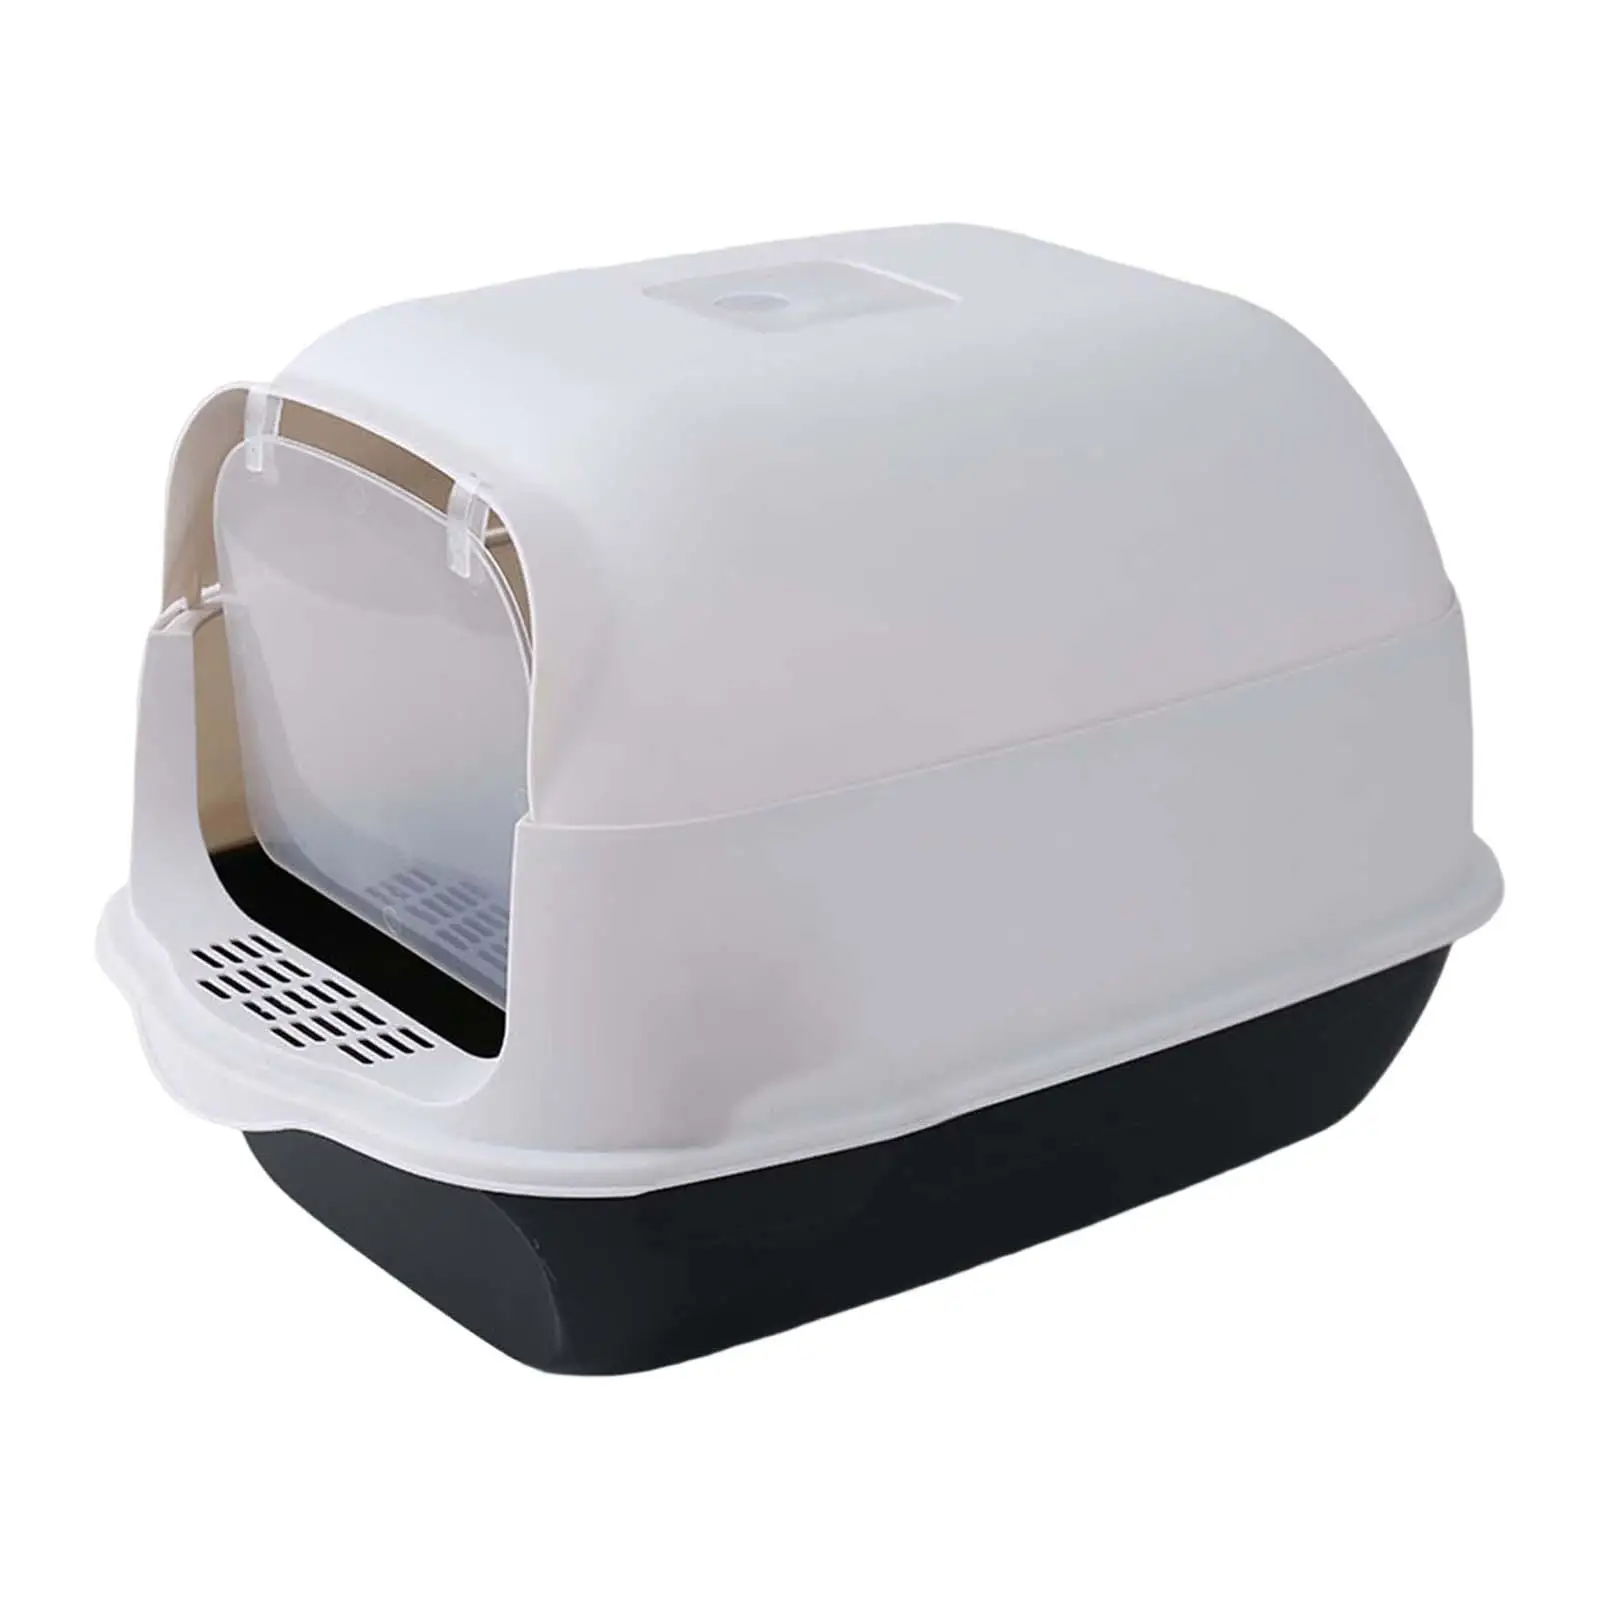 Large Cat Litter Box with Shovel with Door Cleaning House Supplies Training Toilet for Hamster Rabbit Kitten Outdoor Travel